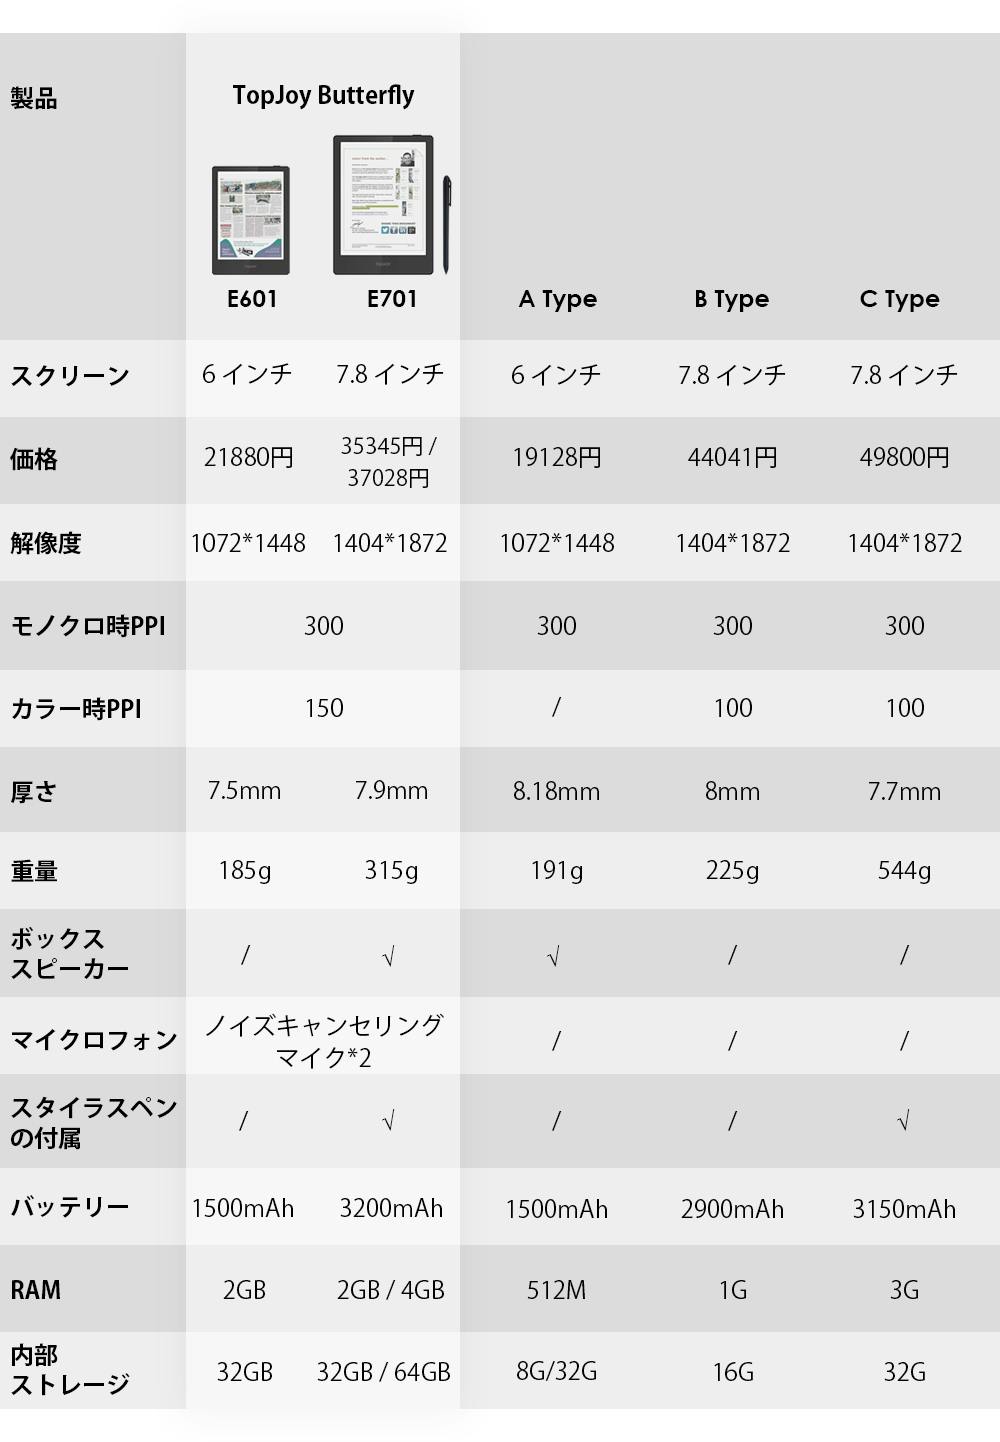 PC/タブレット 電子ブックリーダー TopJoy Butterflyポケットサイズのカラー電子書籍リーダー日本初公開 